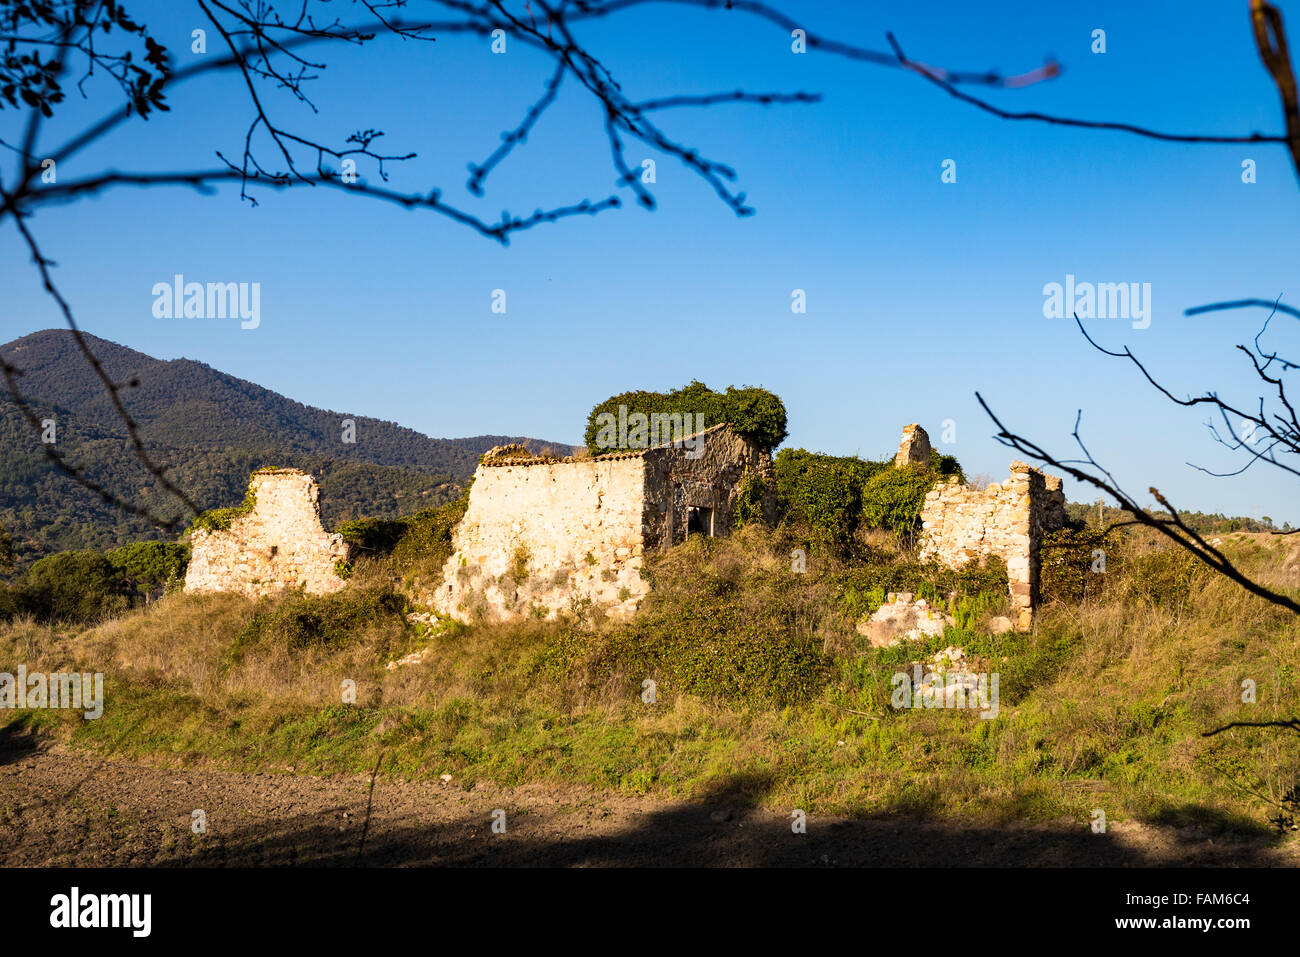 Sun shines on ruins of an old farm house framed by the branches of a trees with mountains in the background. Stock Photo